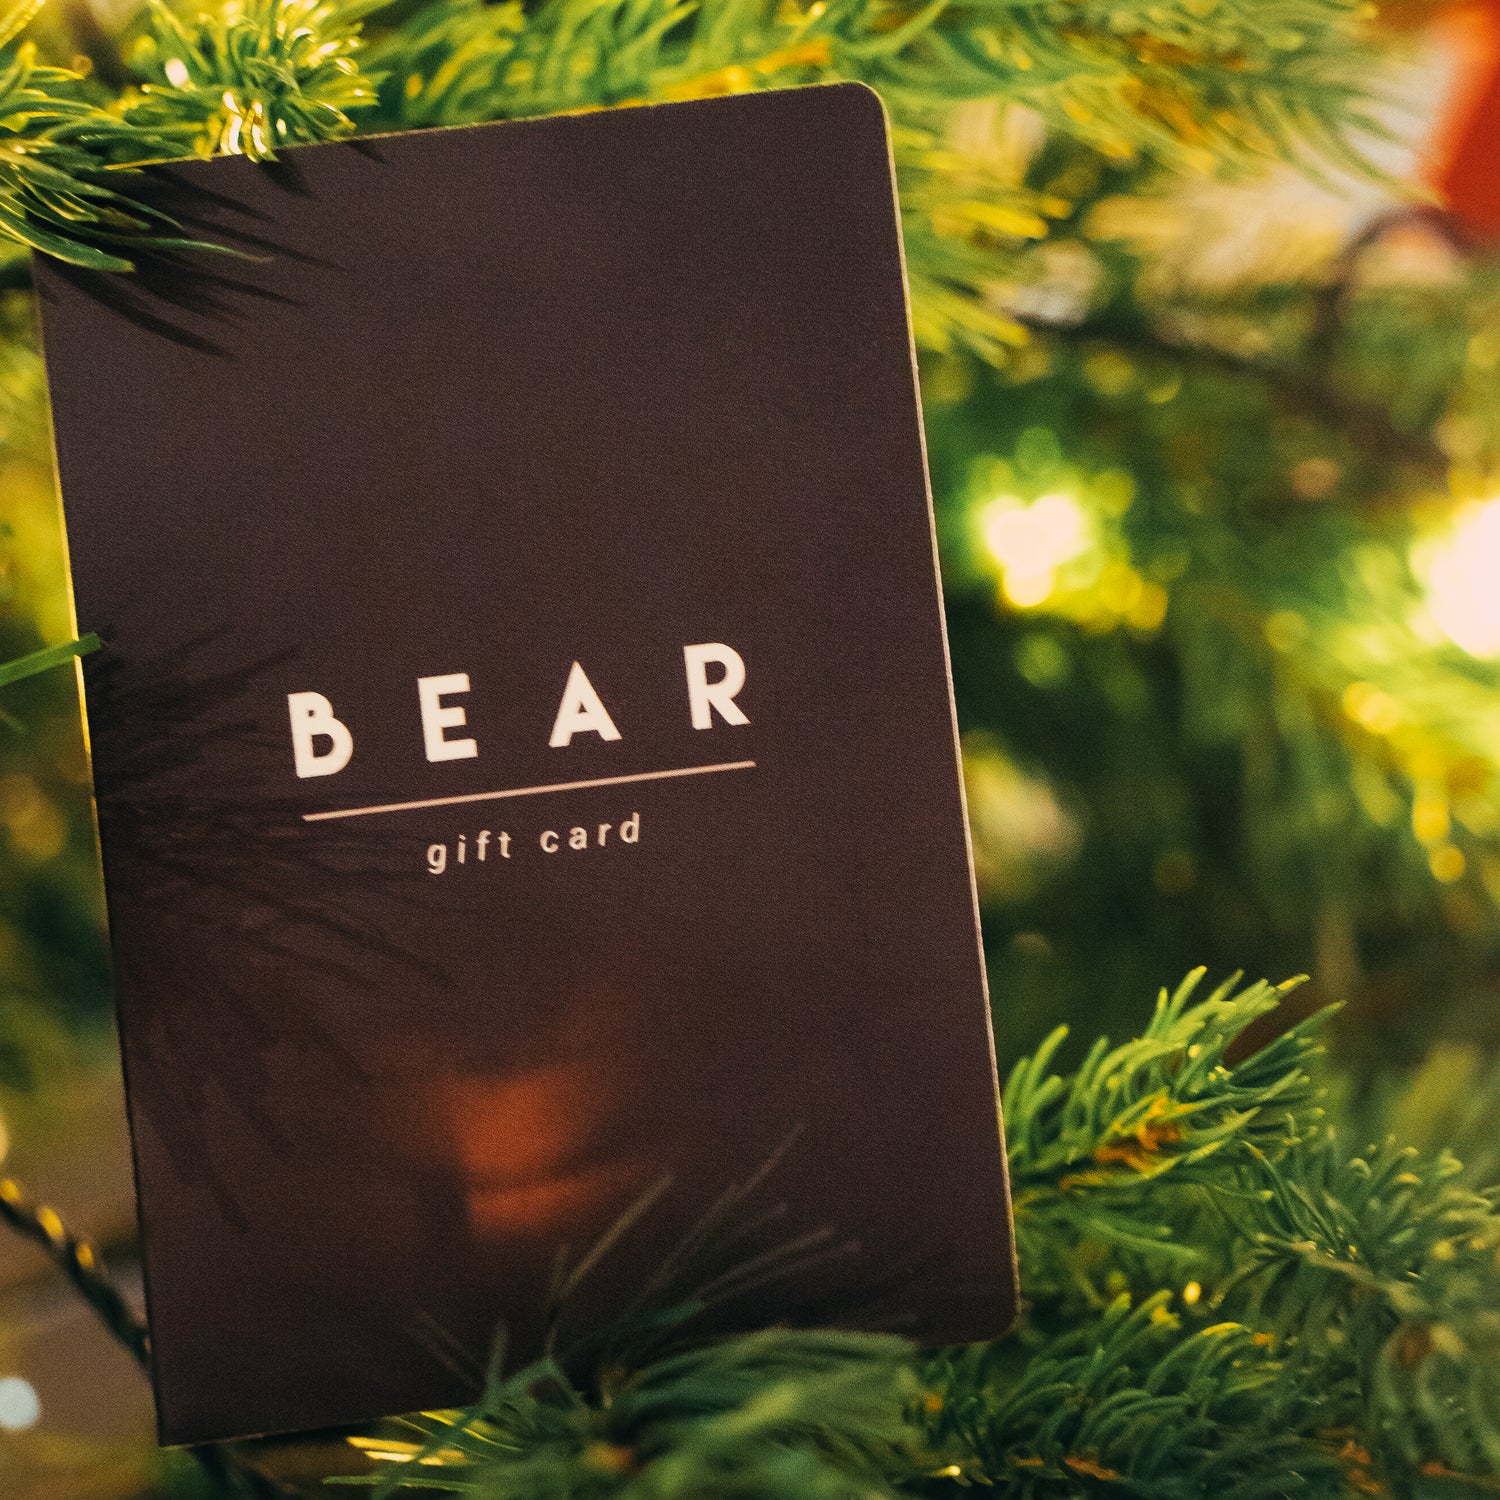 4 reasons why a Gift Card is the perfect present this Christmas